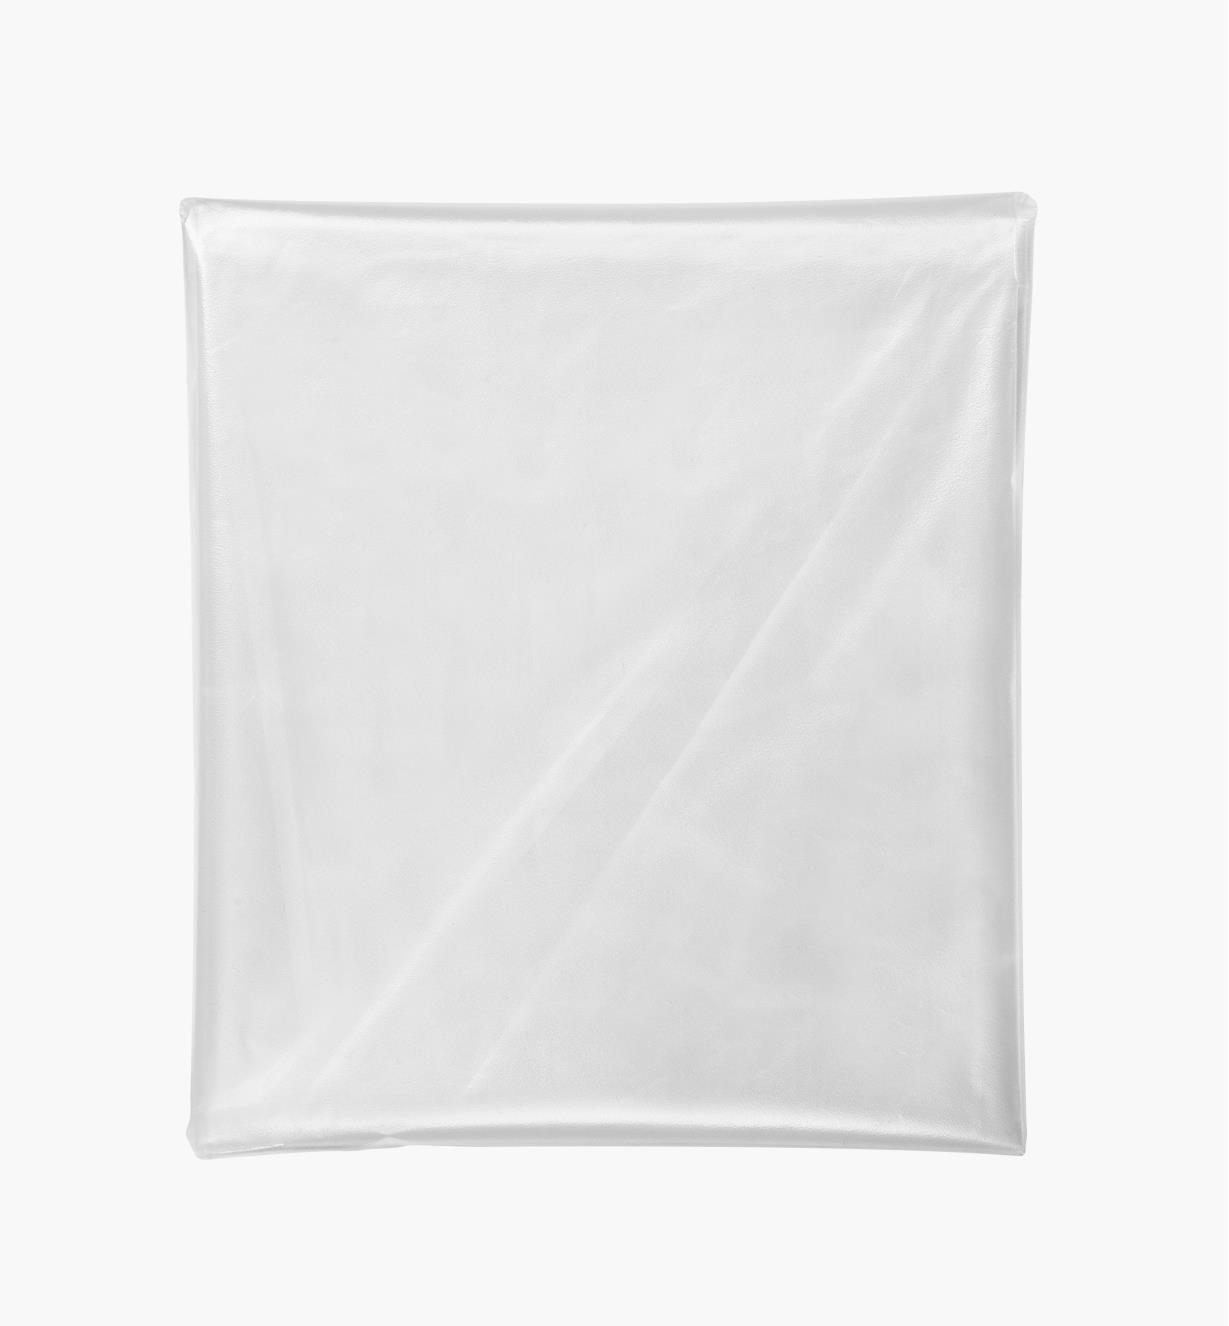 ZA204296 - Disposable Waste Bag ENS-VA-20 for CT Cyclone Dust Collection Pre-Separator, pkg. of 10